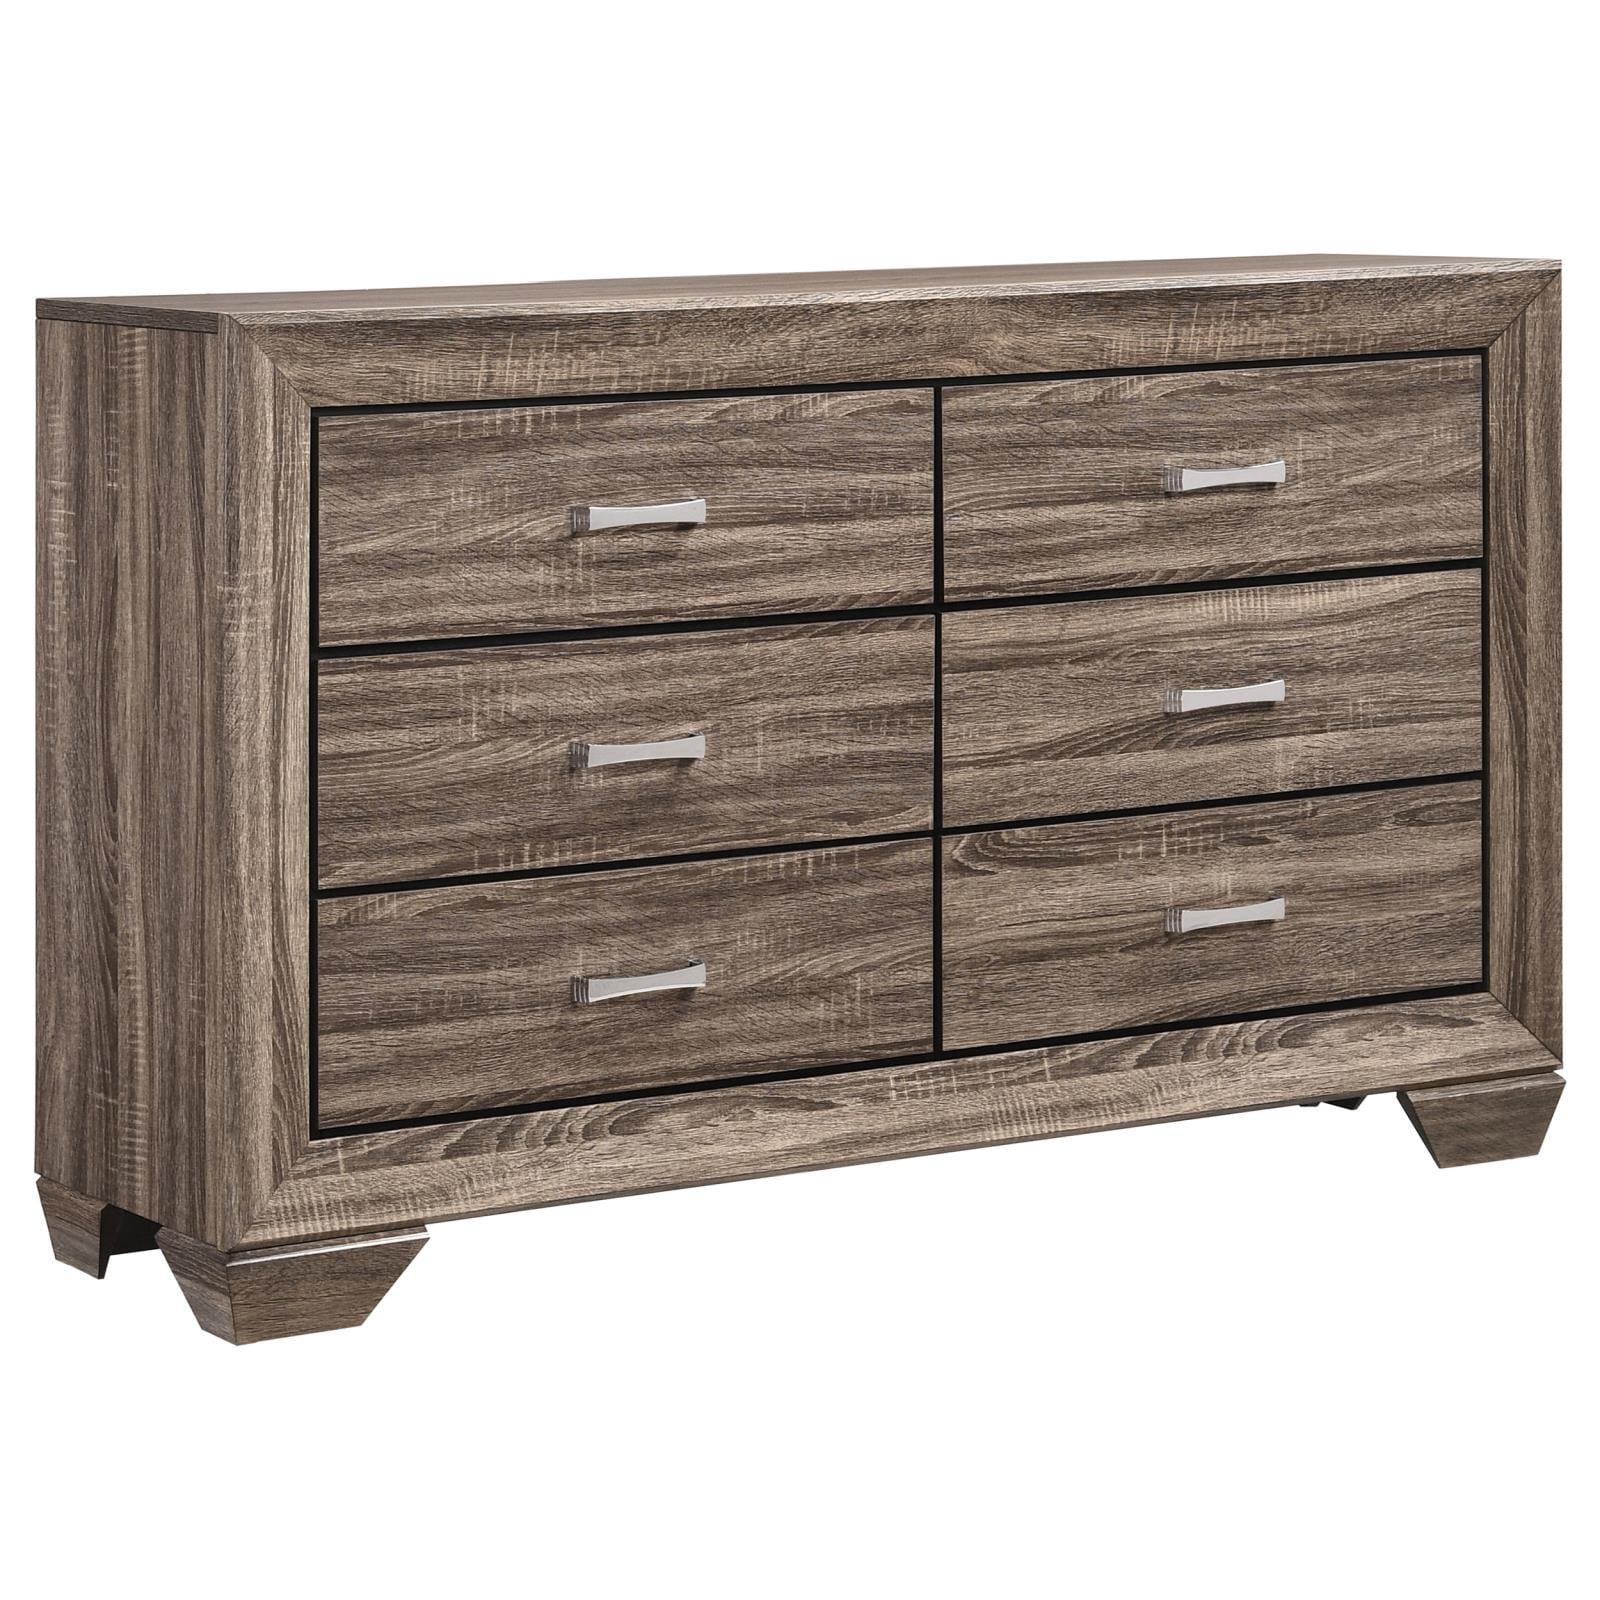 Transitional Mid-Century 6-Drawer Dresser in Washed Taupe with Chrome Handles